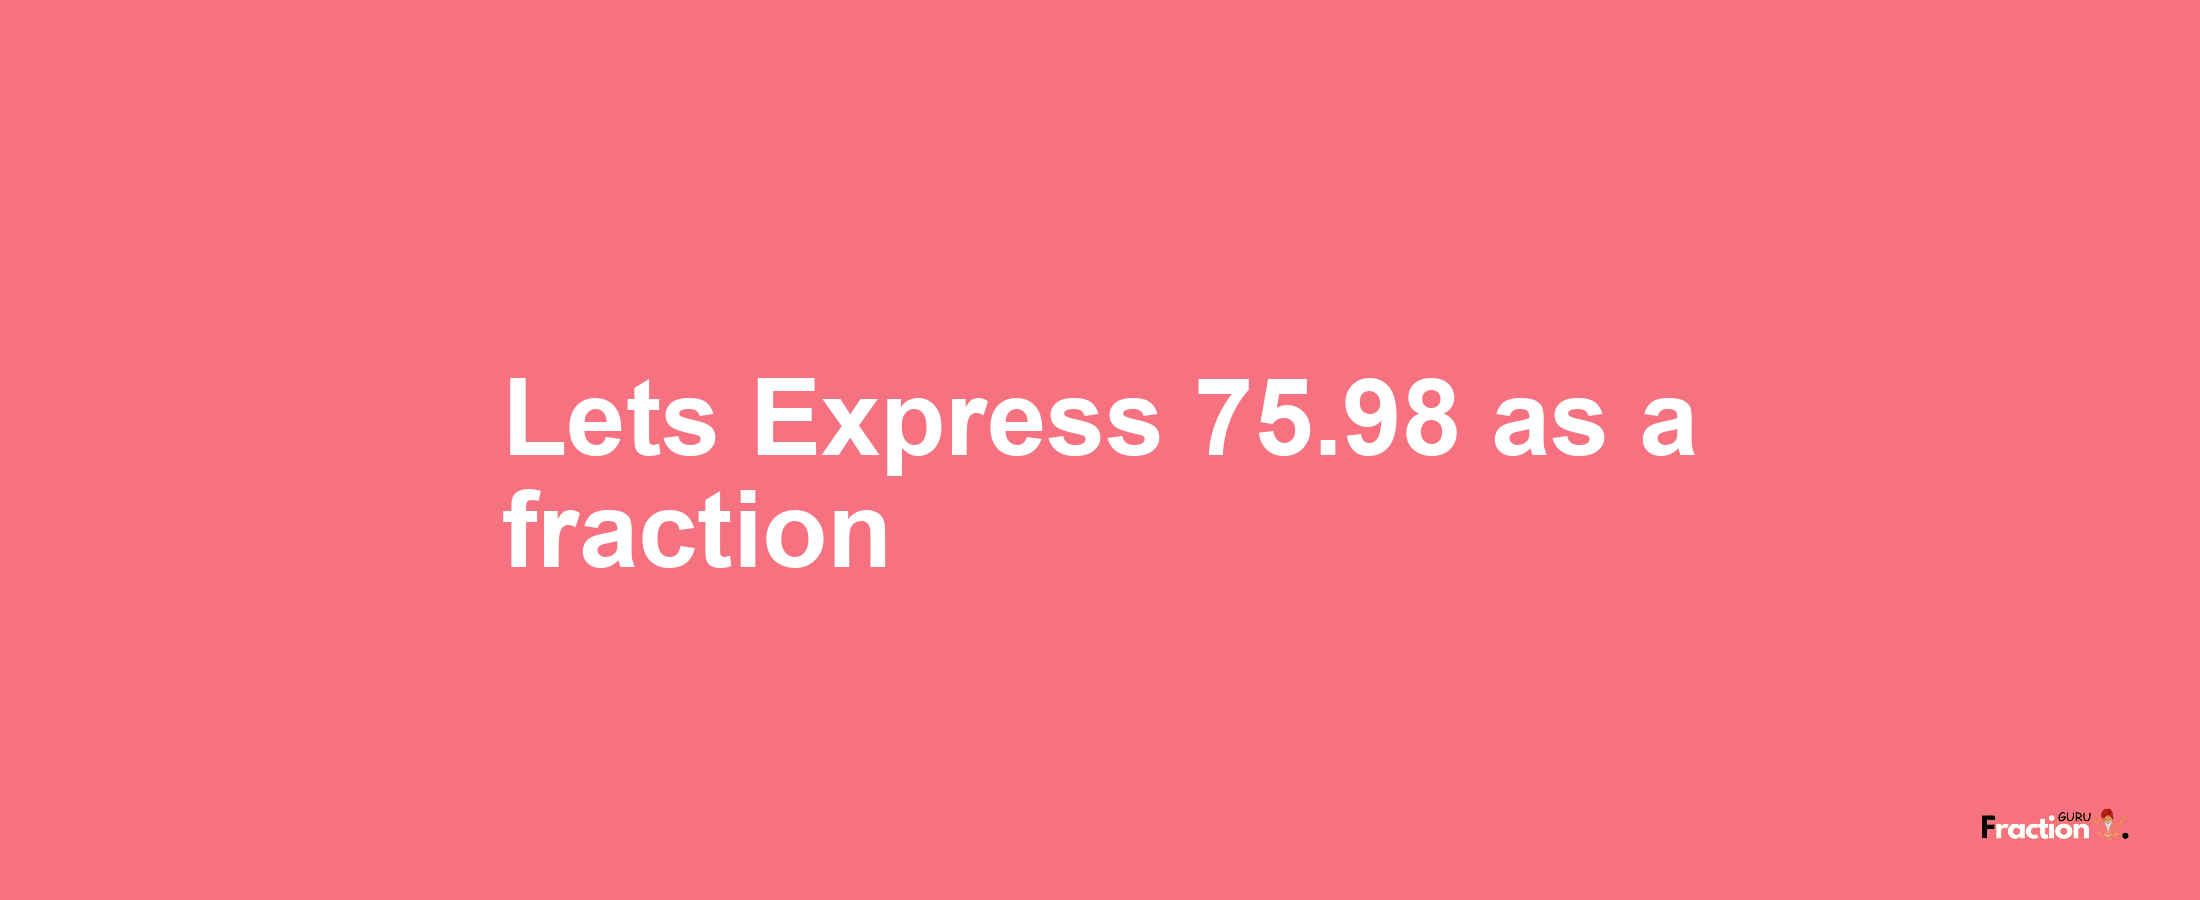 Lets Express 75.98 as afraction